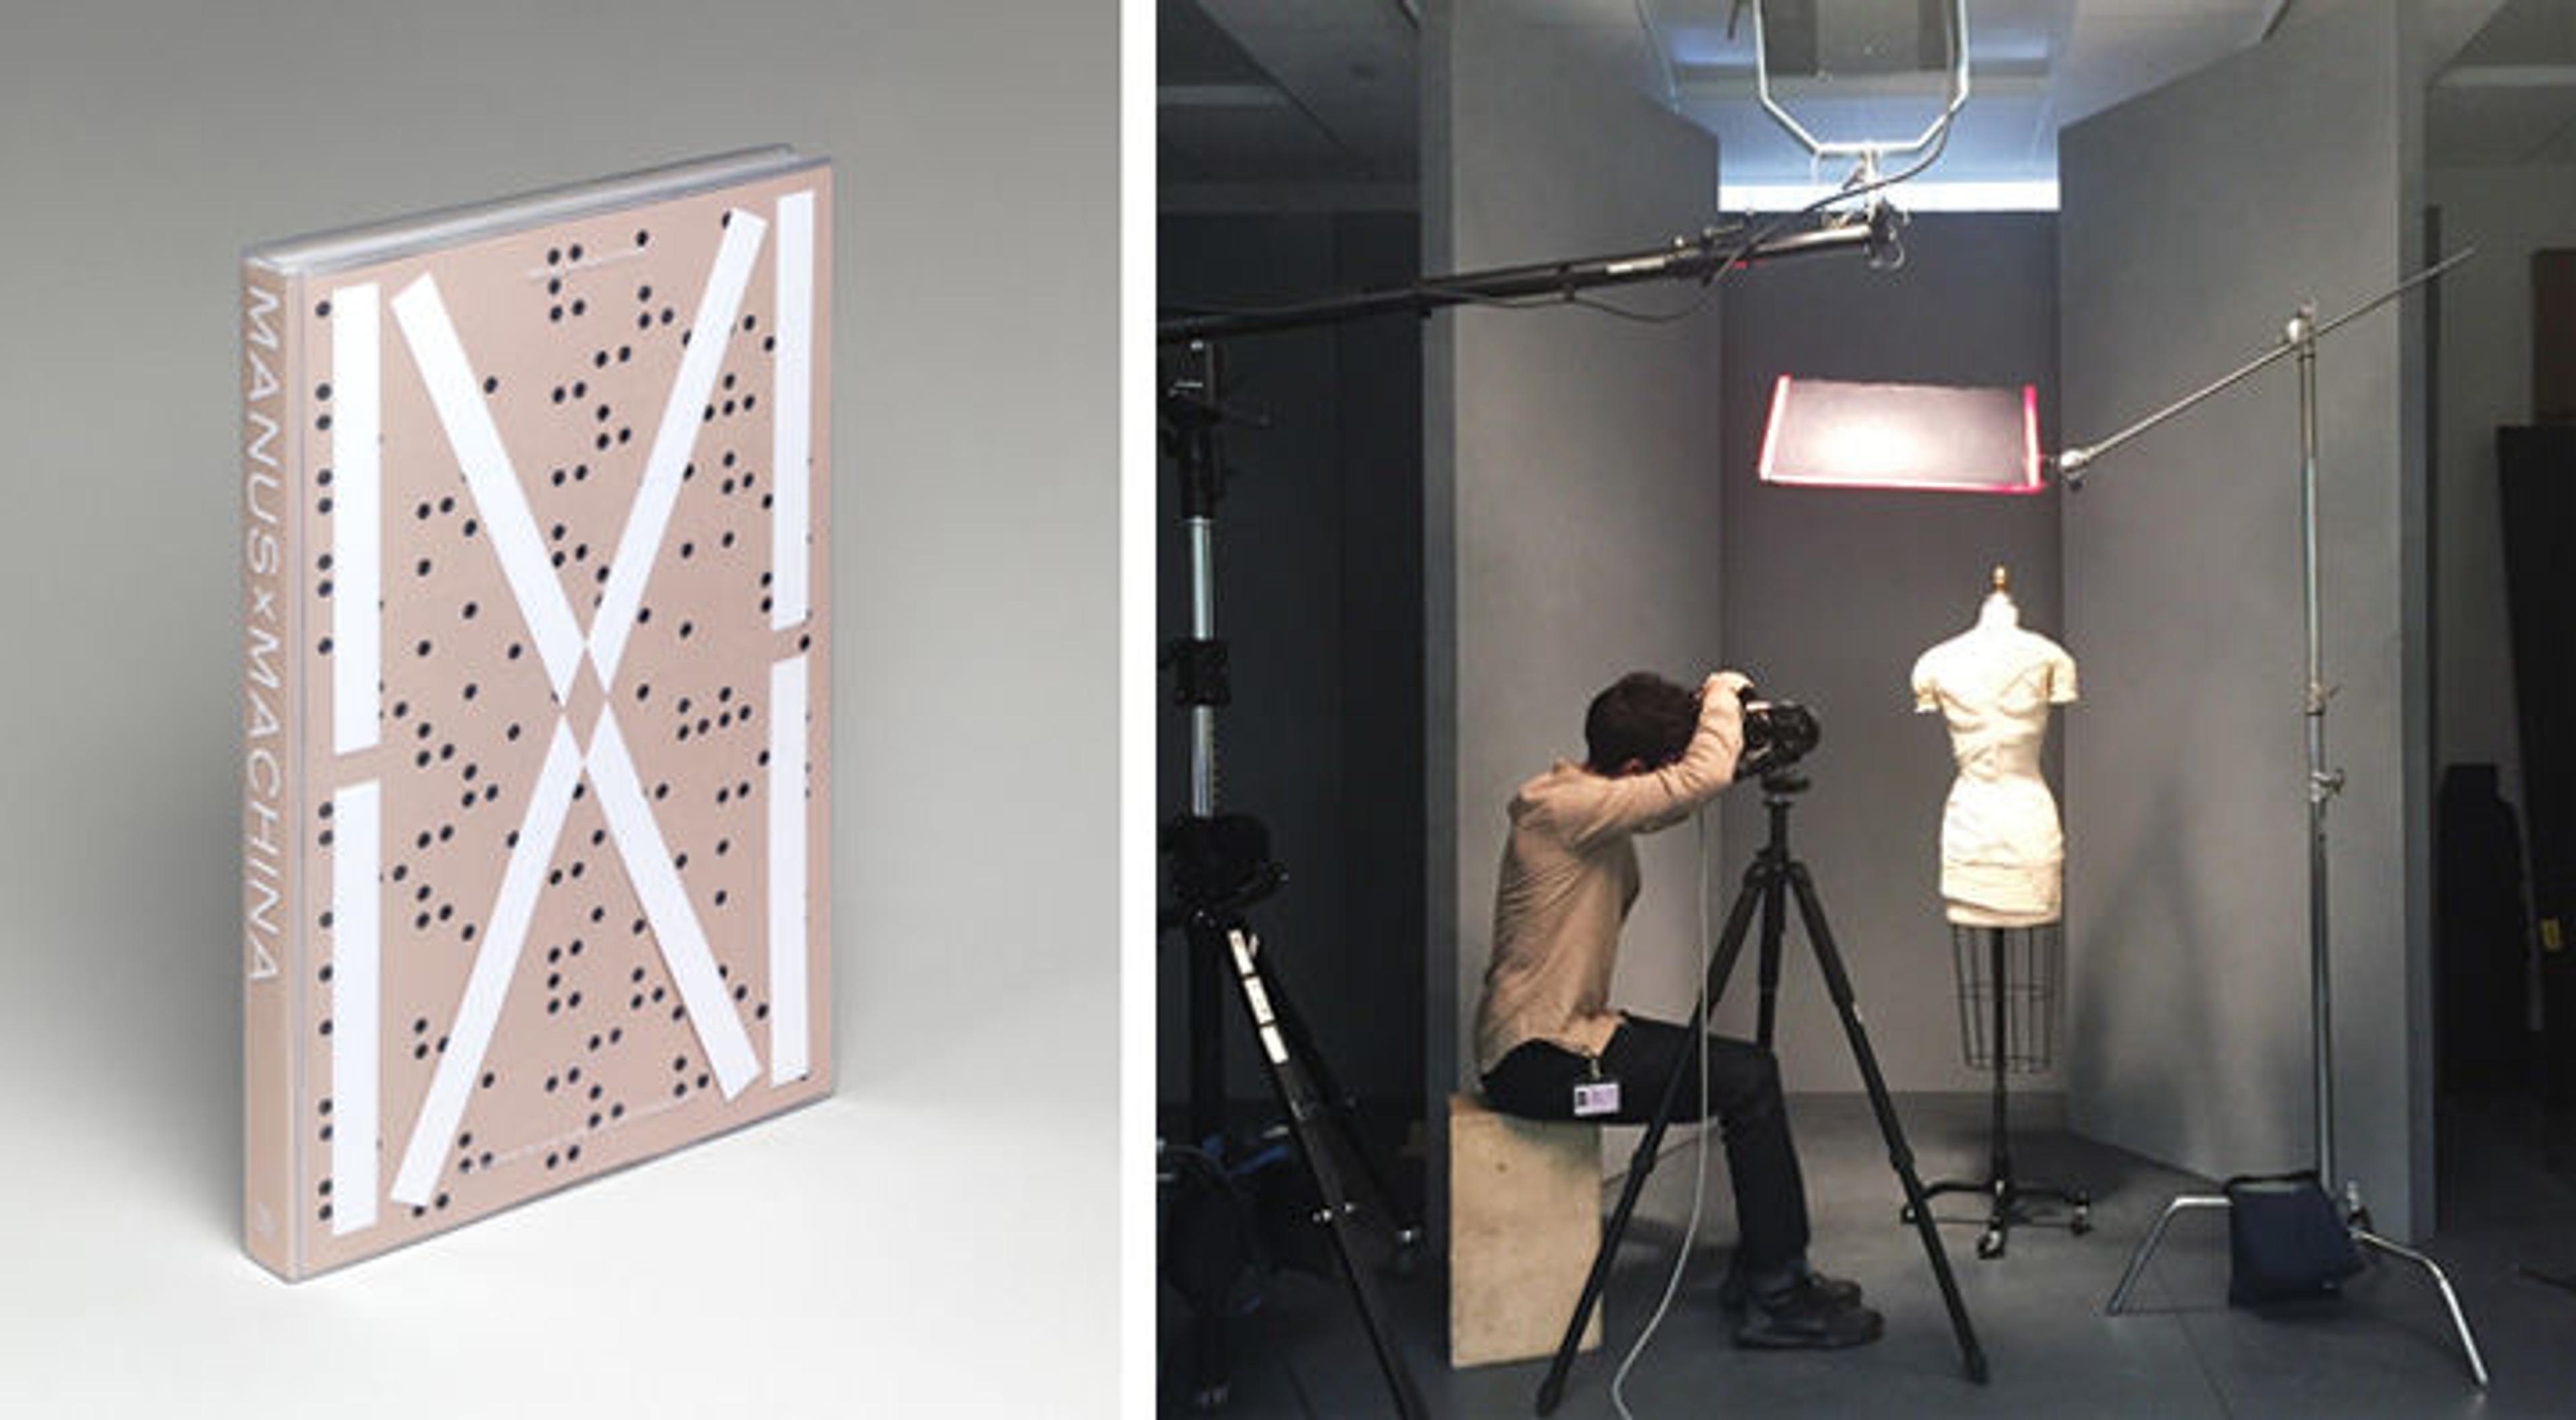 Catalogue cover (left) | Nicholas Cope photographing a dress (right)